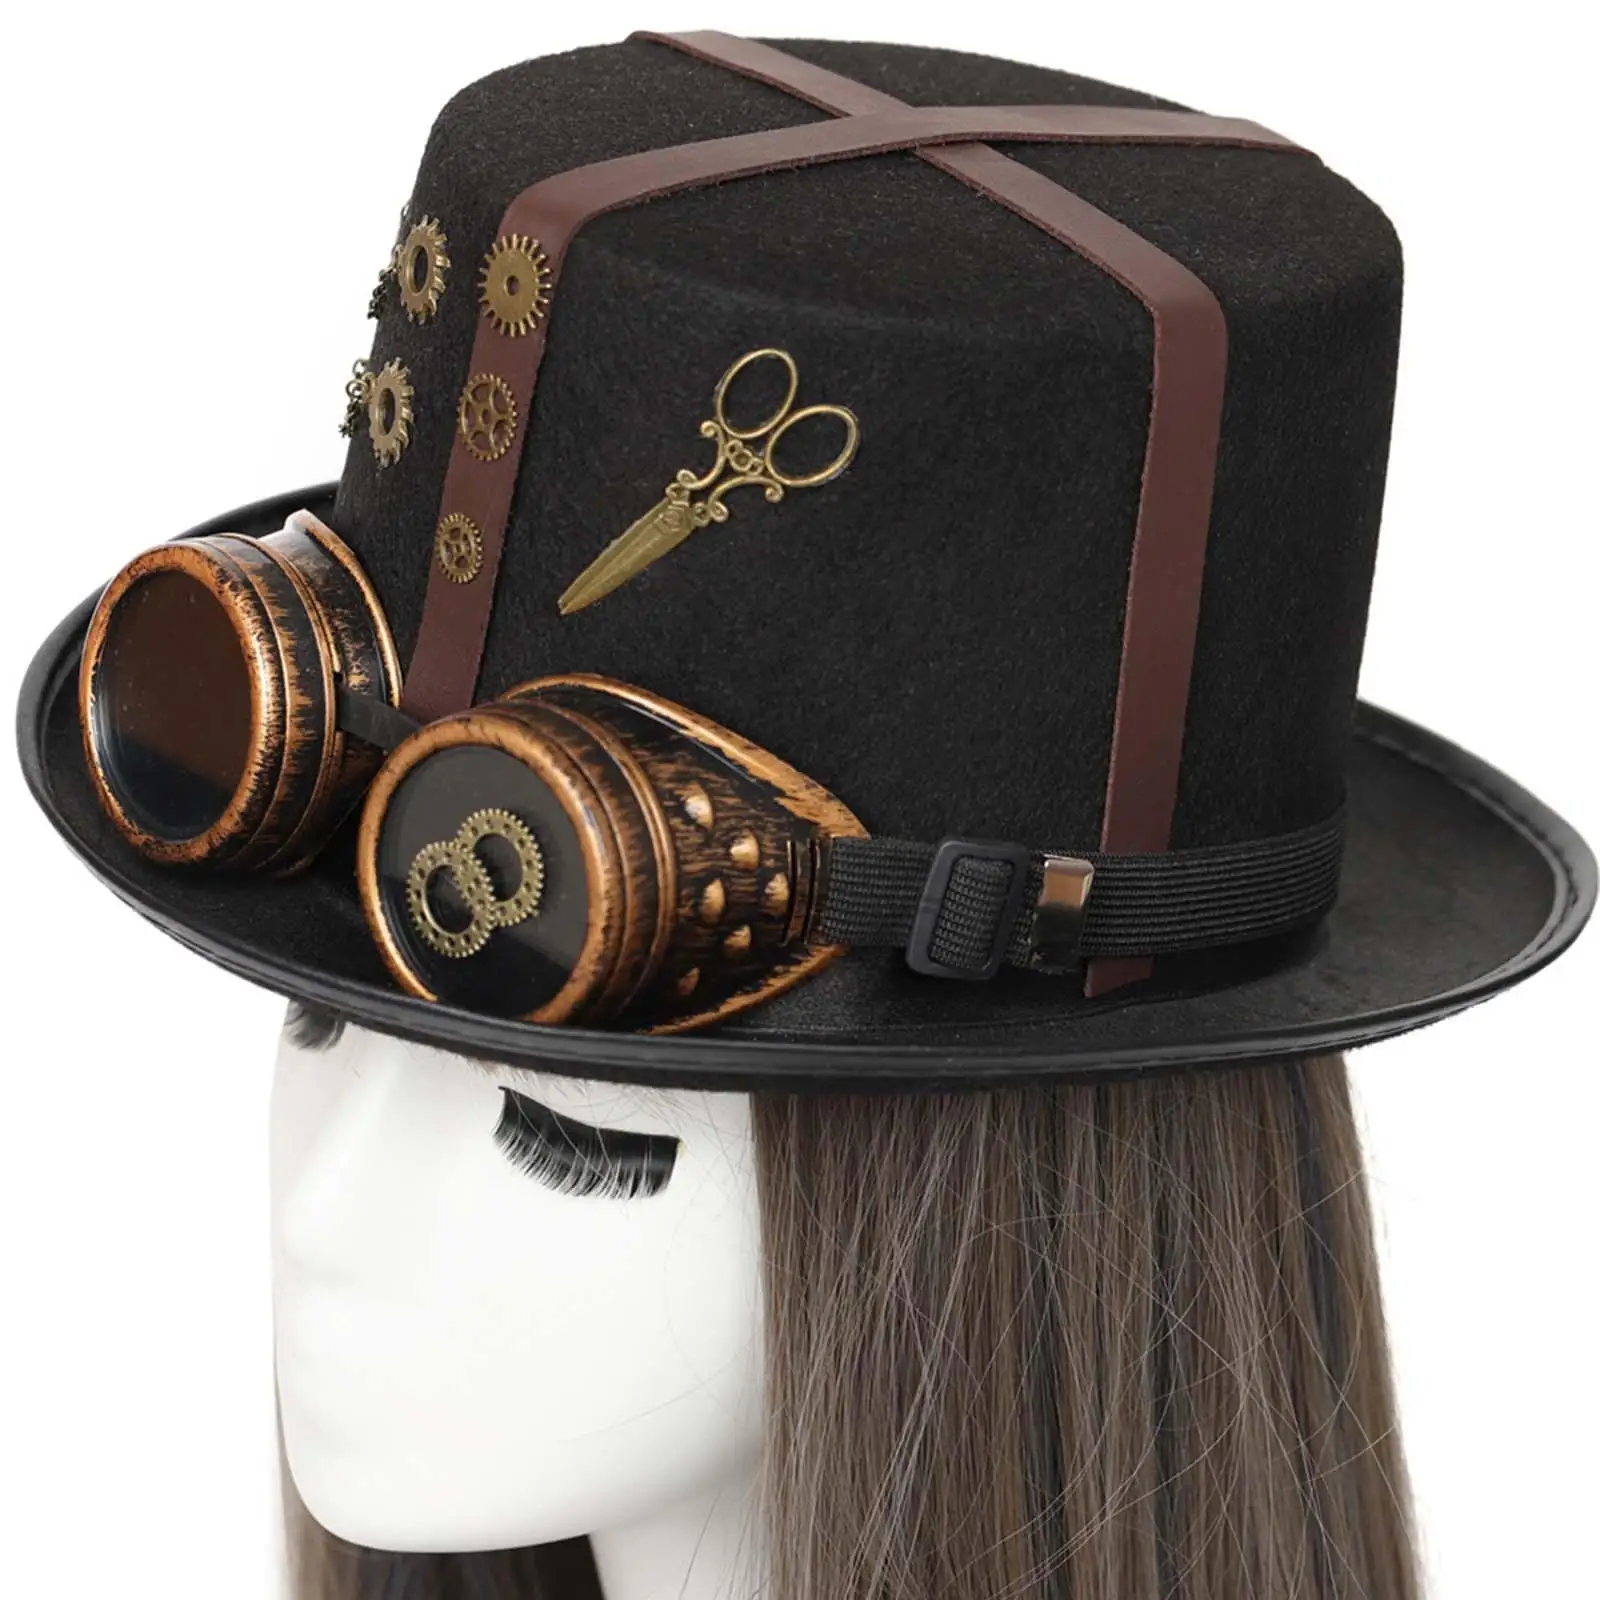 Vintage Style Steampunk Gears Top Hats Novelty Dance Hat Wide Brim Head Wear for Cosplay Halloween party One Size